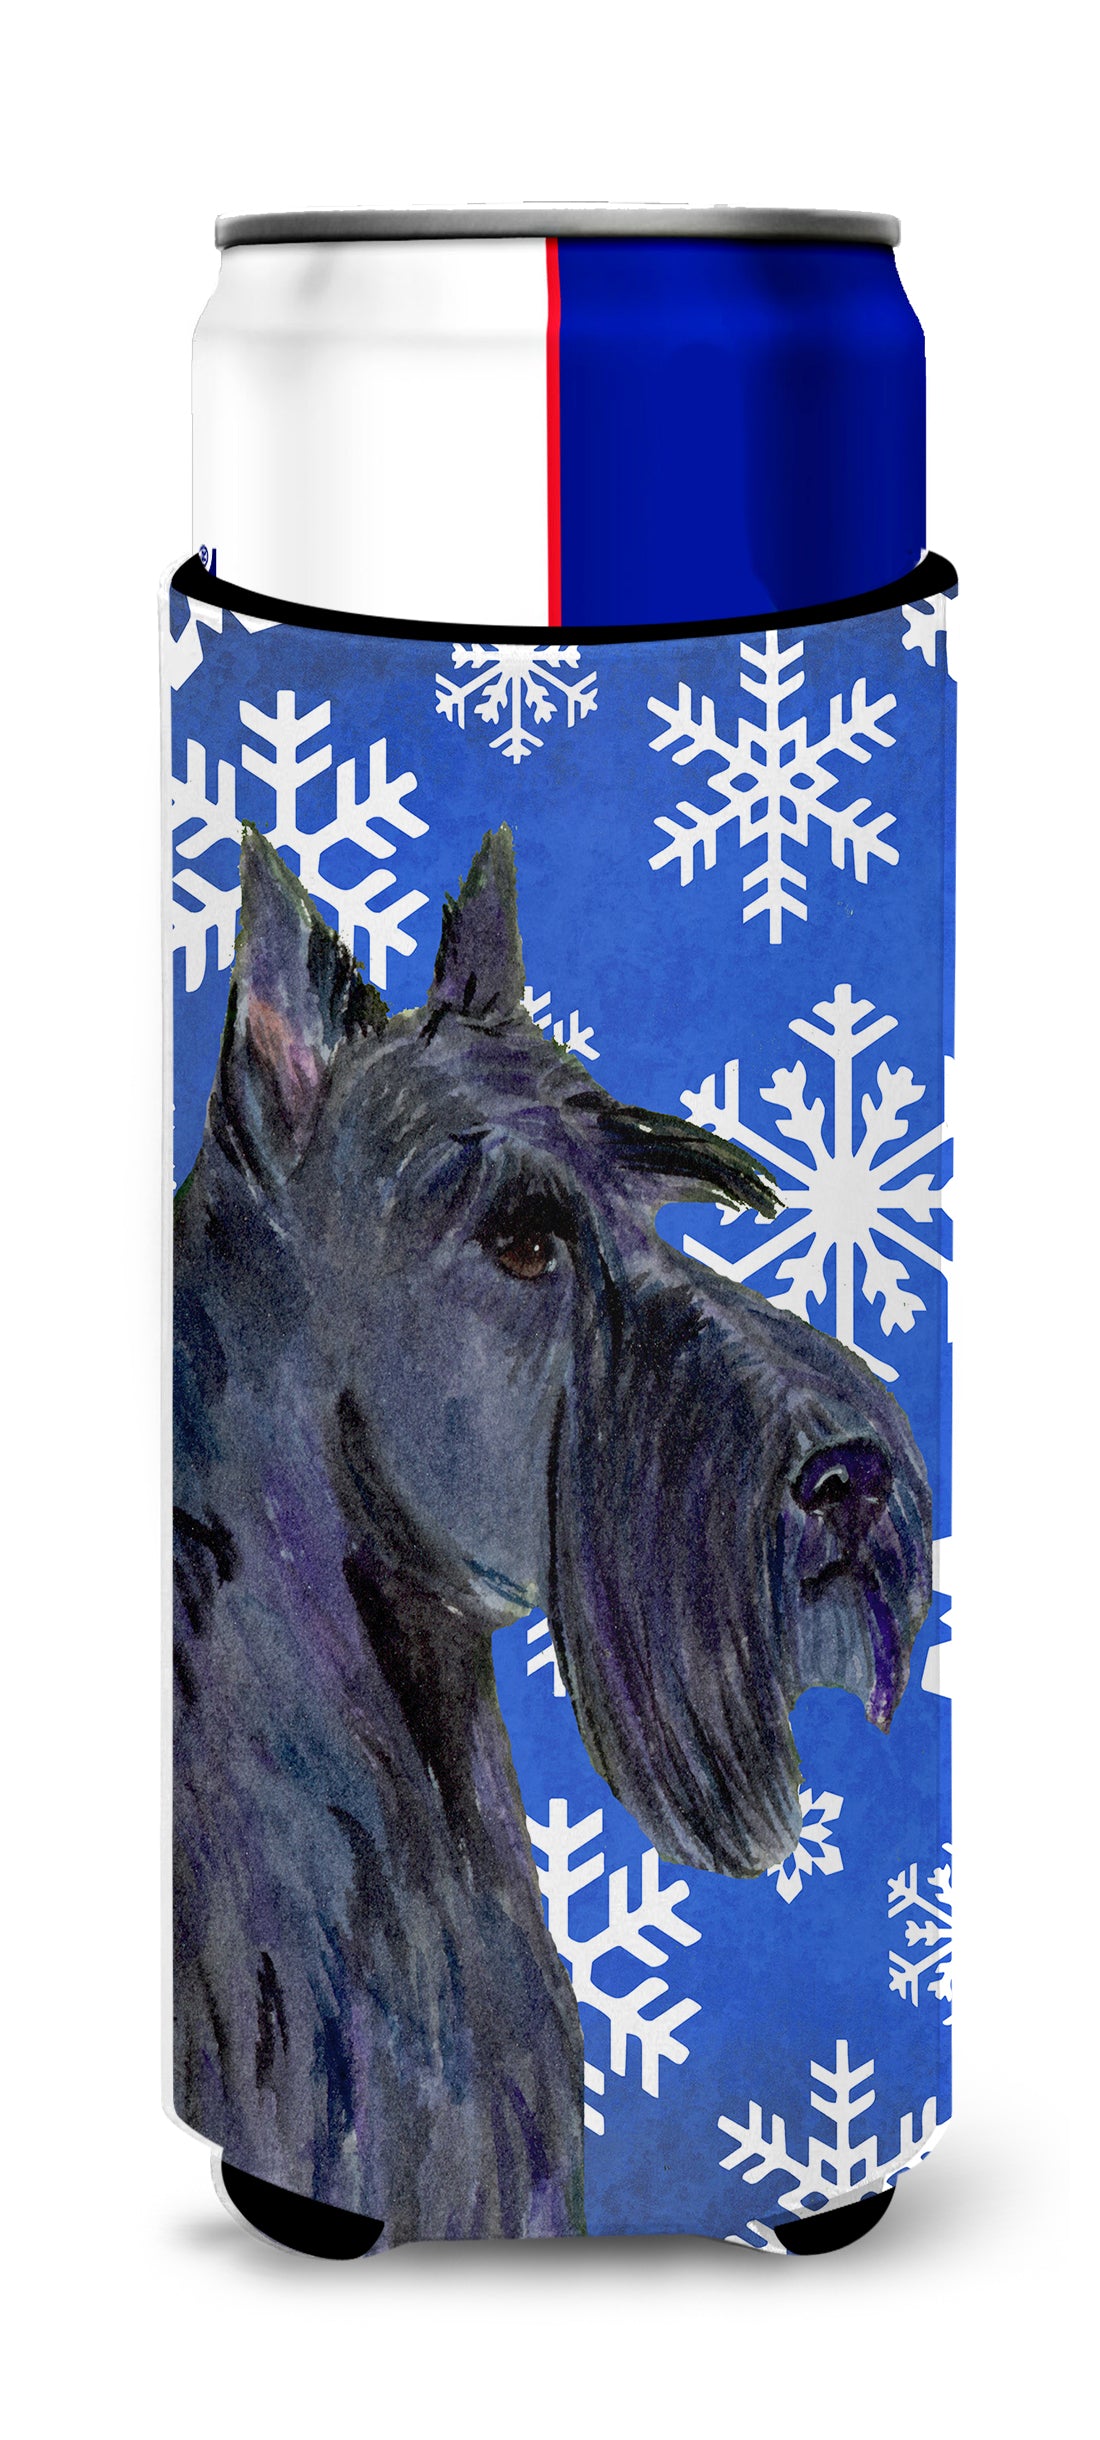 Scottish Terrier Winter Snowflakes Holiday Ultra Beverage Insulators for slim cans SS4667MUK.